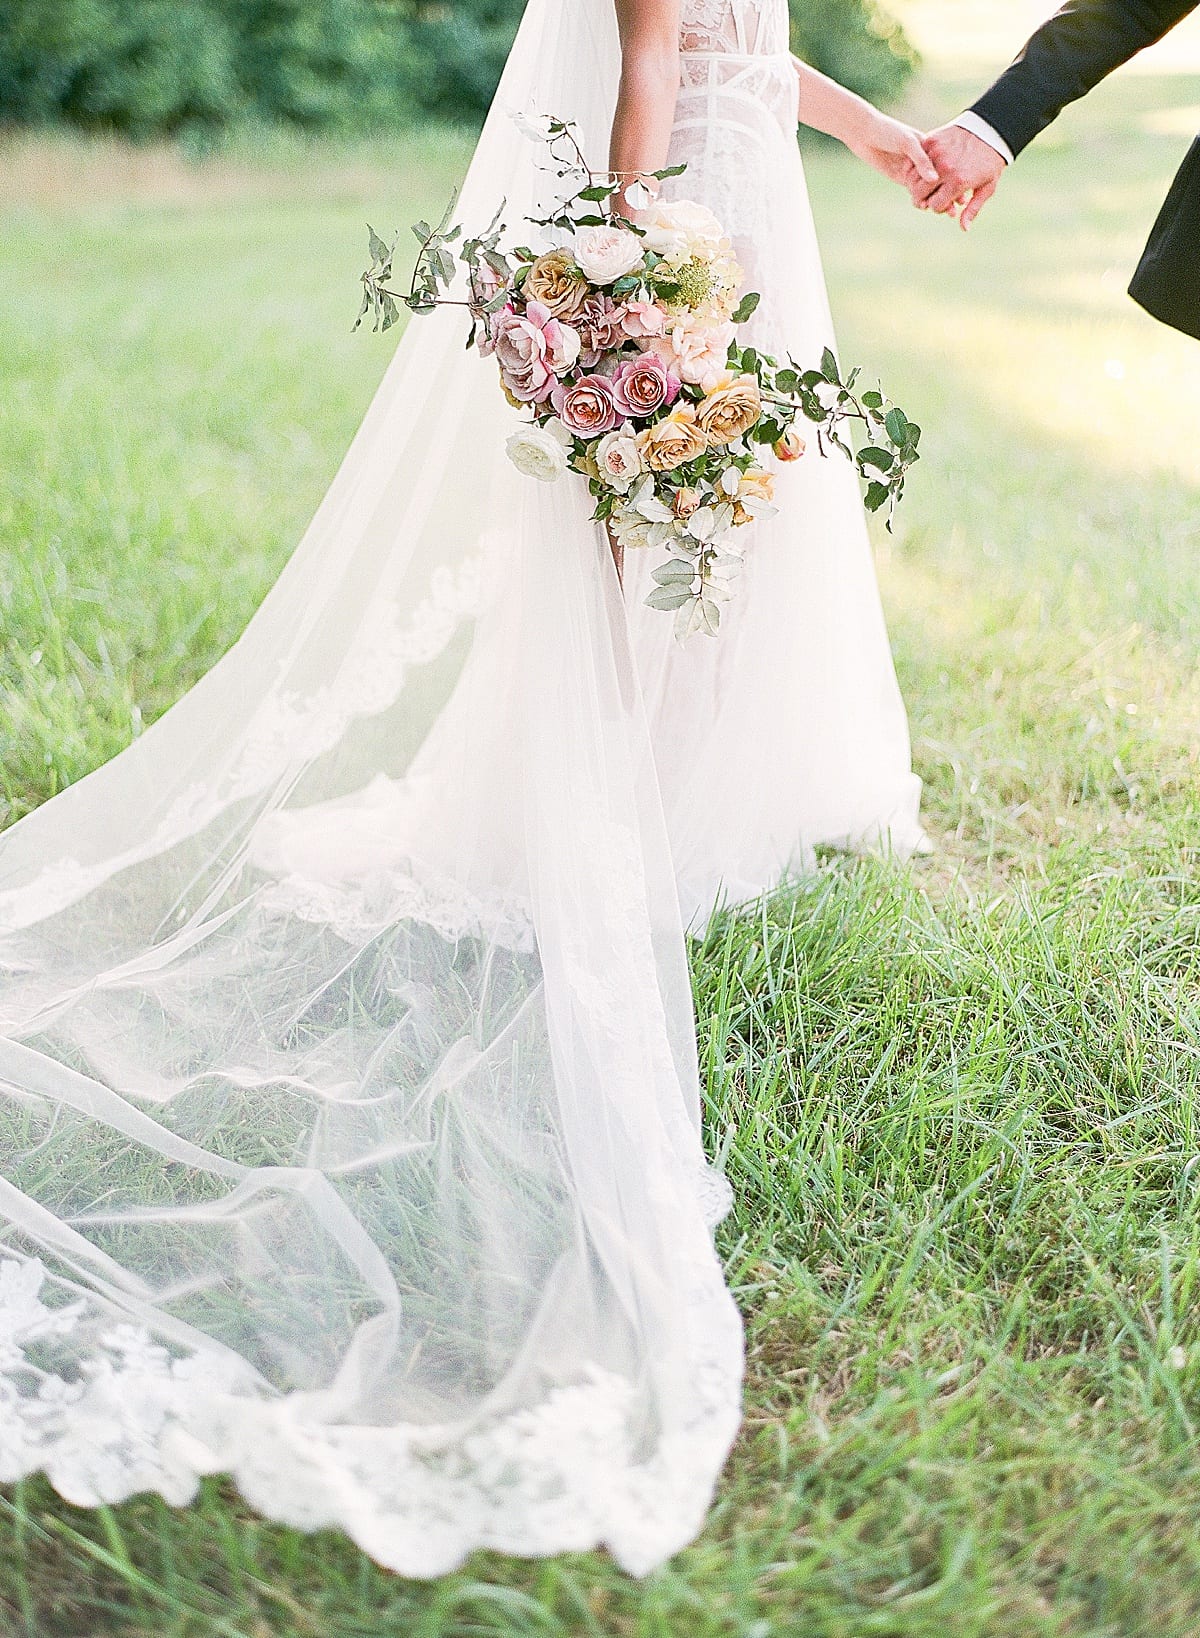 Bridal Bouquet with veil trailing behind and Bride holding grooms hand 